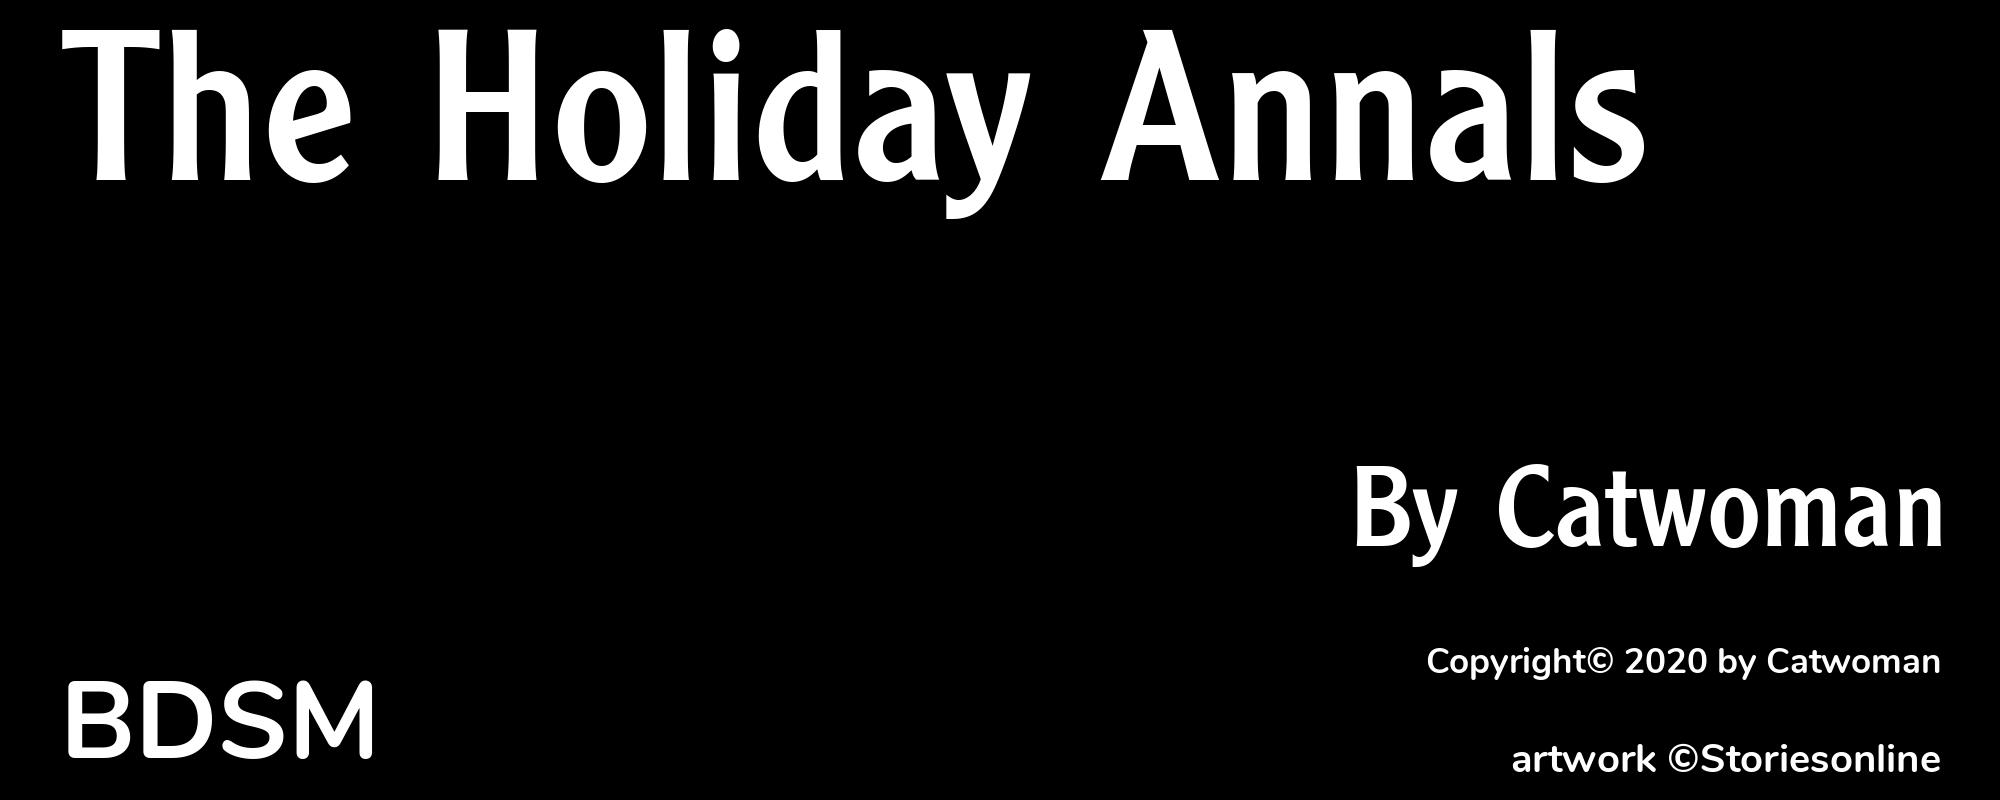 The Holiday Annals - Cover